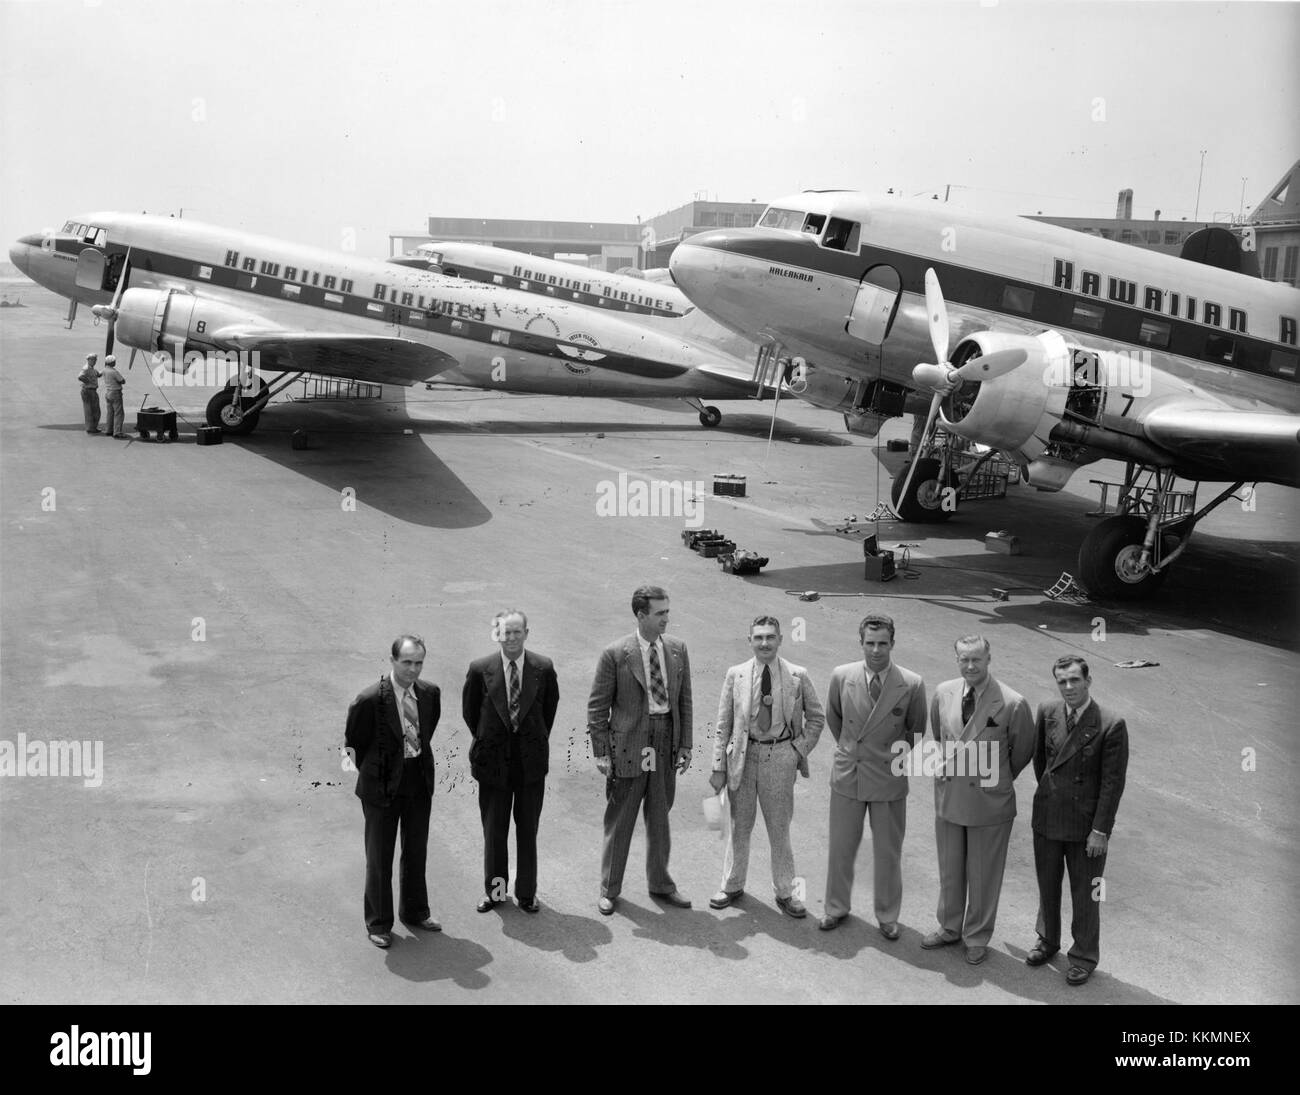 Douglas Aircraft Company personnel tasked with ferrying Hawaiian Airlines' new DC-3s from Oakland Field, Oakland, California, to John Rodgers Airport in Honolulu, Hawaii, pose in front of the three aircraft at Douglas Aircraft Company's Santa Monica, California, plant, sometime before the flight on August 27, 1941.  Aircraft are, front to back: Douglas DC-3 'Haleakala' (fleet no. 7), Douglas DC-3 'Waialeale' (fleet no. 8), and Douglas DC-3 'Mauna Loa' (r/n N33606). Hawaiian Airlines Douglas DC-3 at Santa Monica pre-delivery Stock Photo